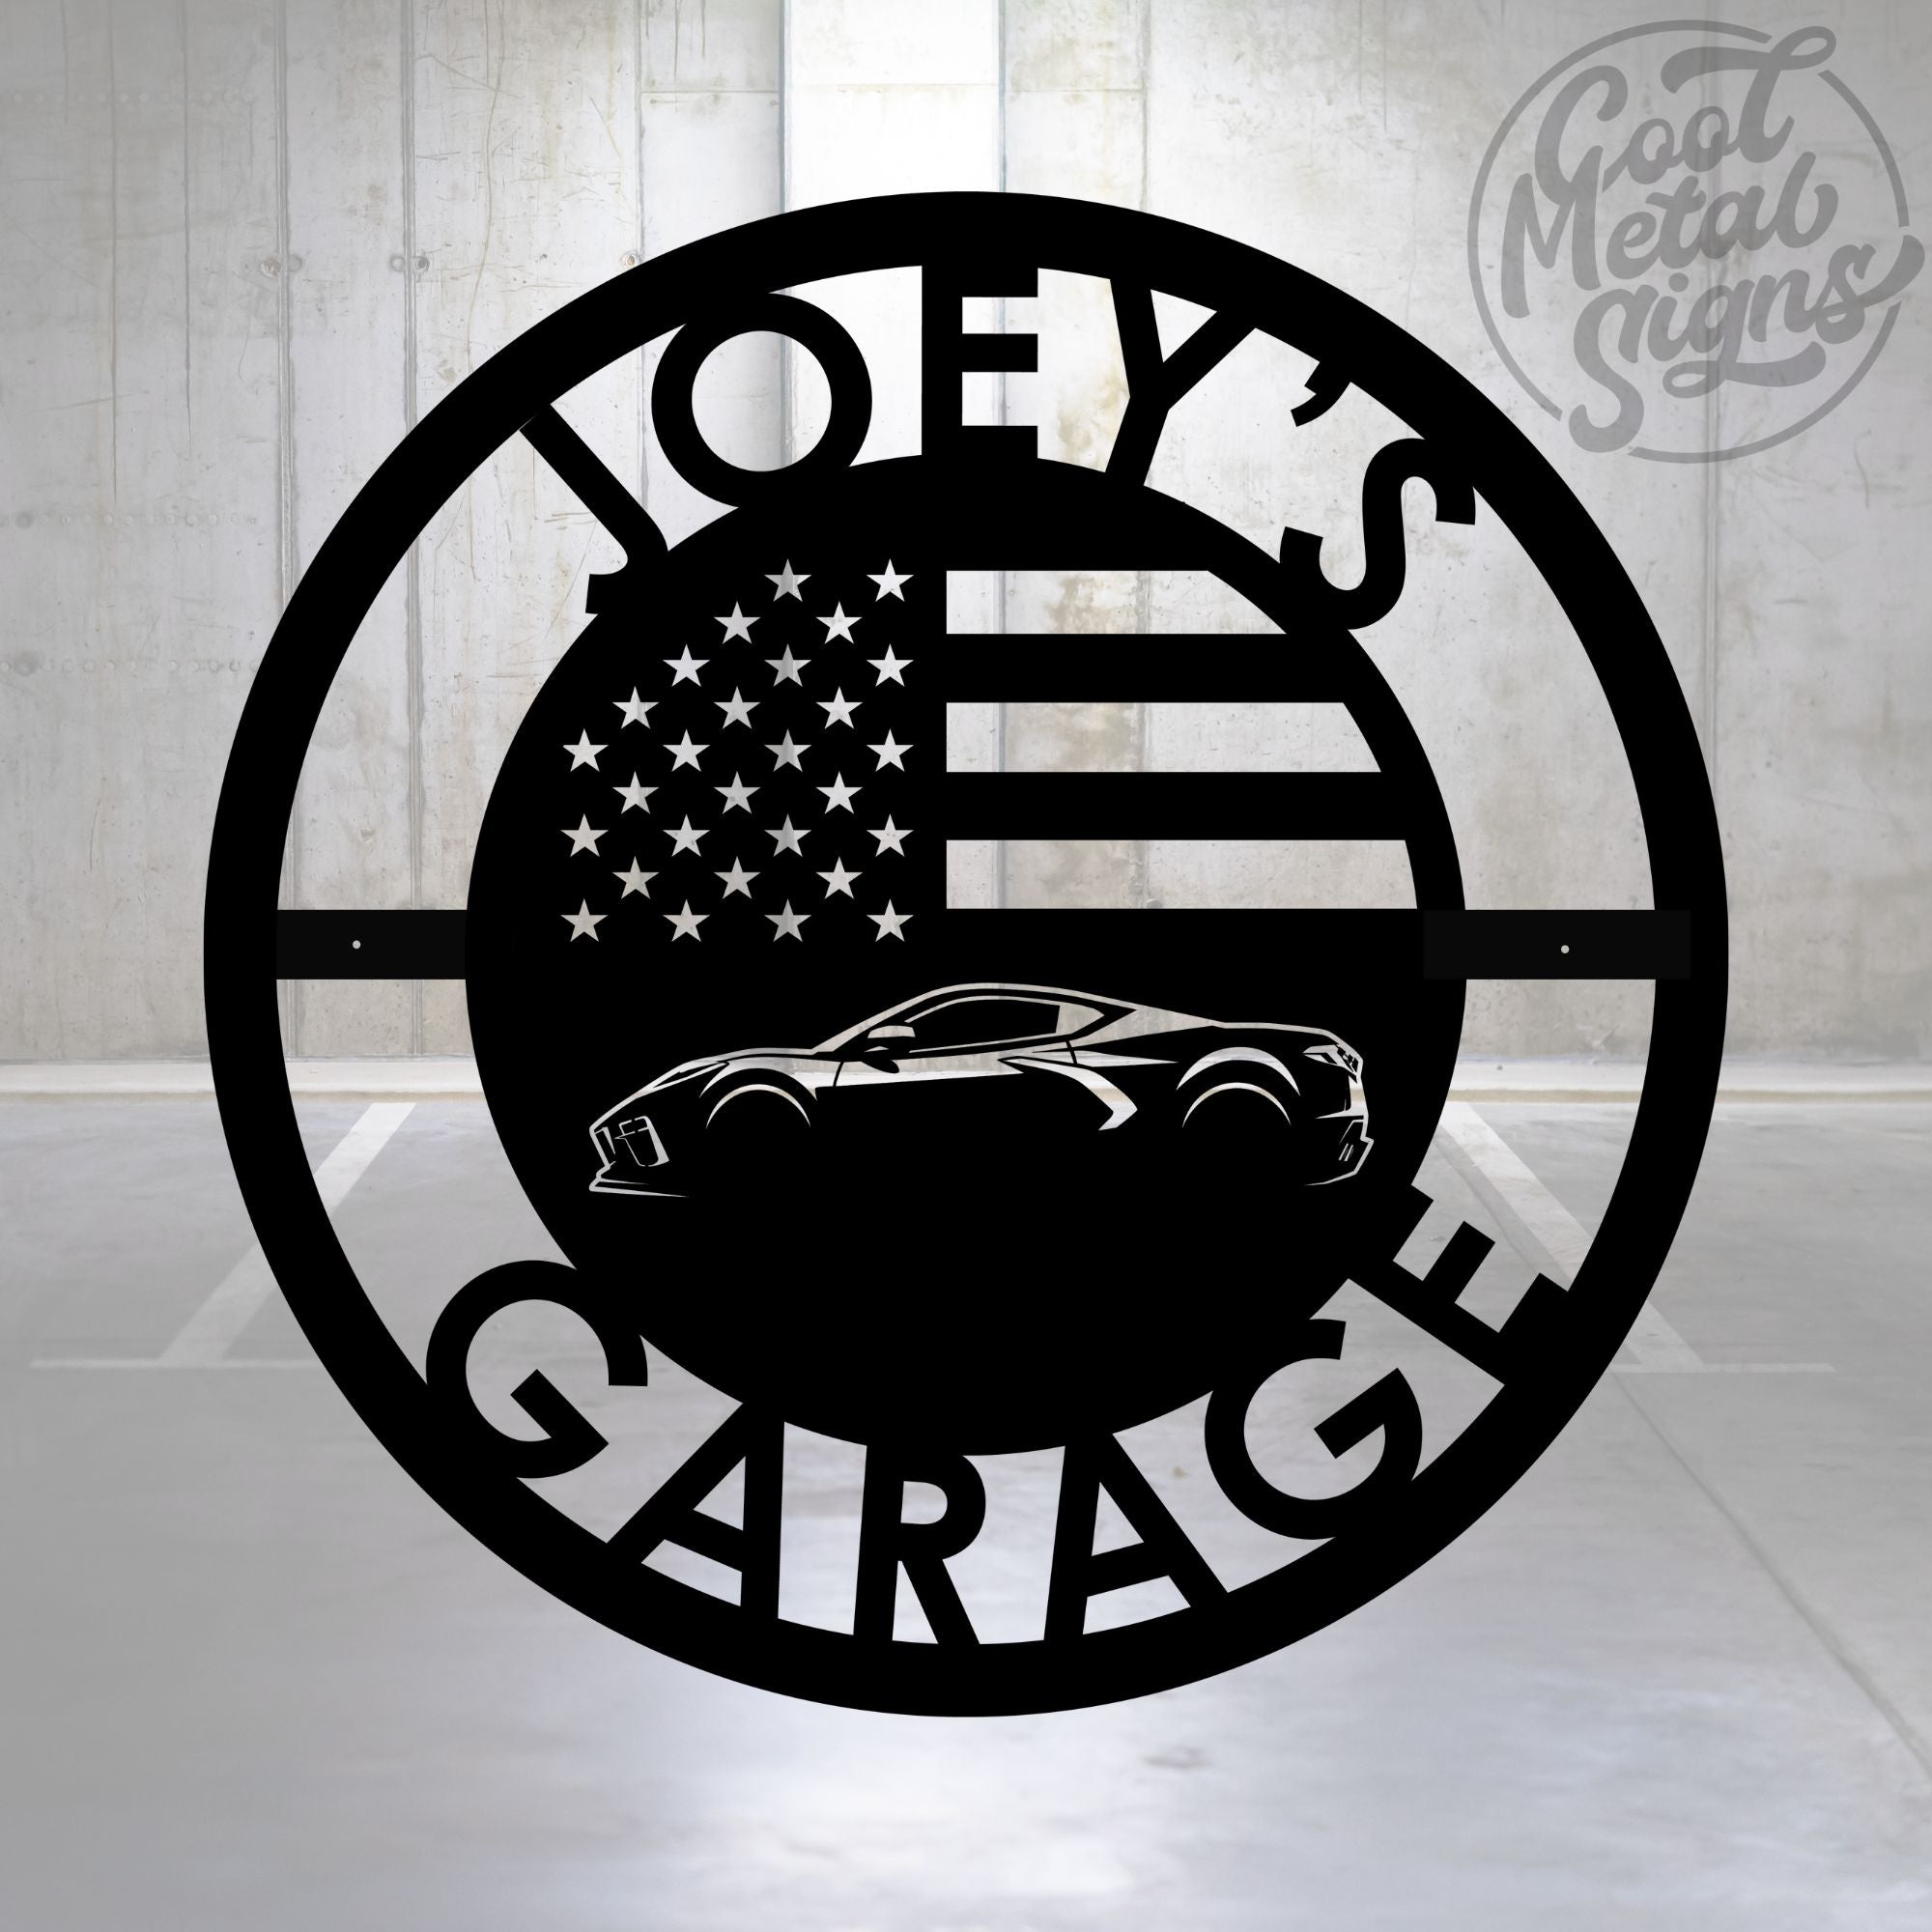 Personalized Corvette C8 Garage Sign - Cool Metal Signs